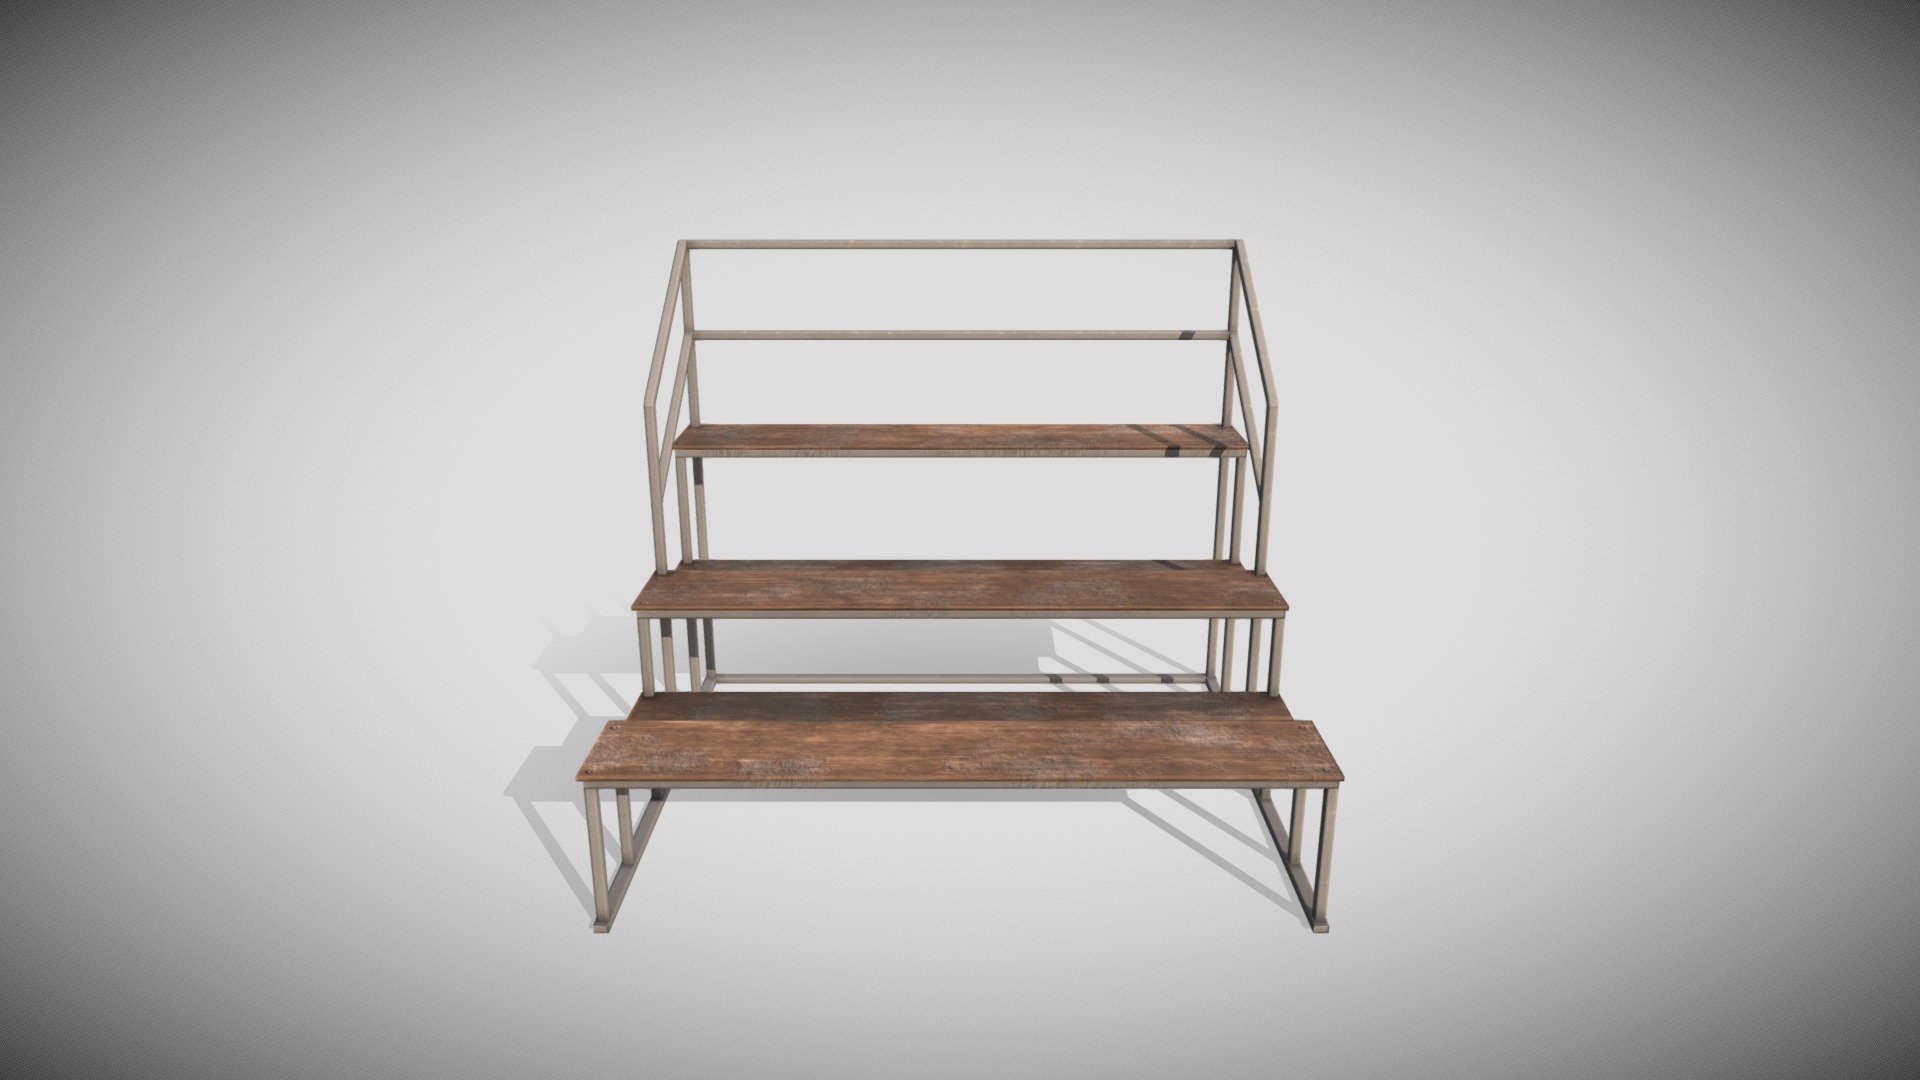 Basketball Bench model.
Game-ready. Low-poly with PBR materials ( Albedo, Metallic+Roughness+AO, Normal map)
Email: yrayushka@yahoo.com
WEB: https://gest.lt/ - Basketball Bench | Game ready - Buy Royalty Free 3D model by Gest.lt (@gestLT) 3d model